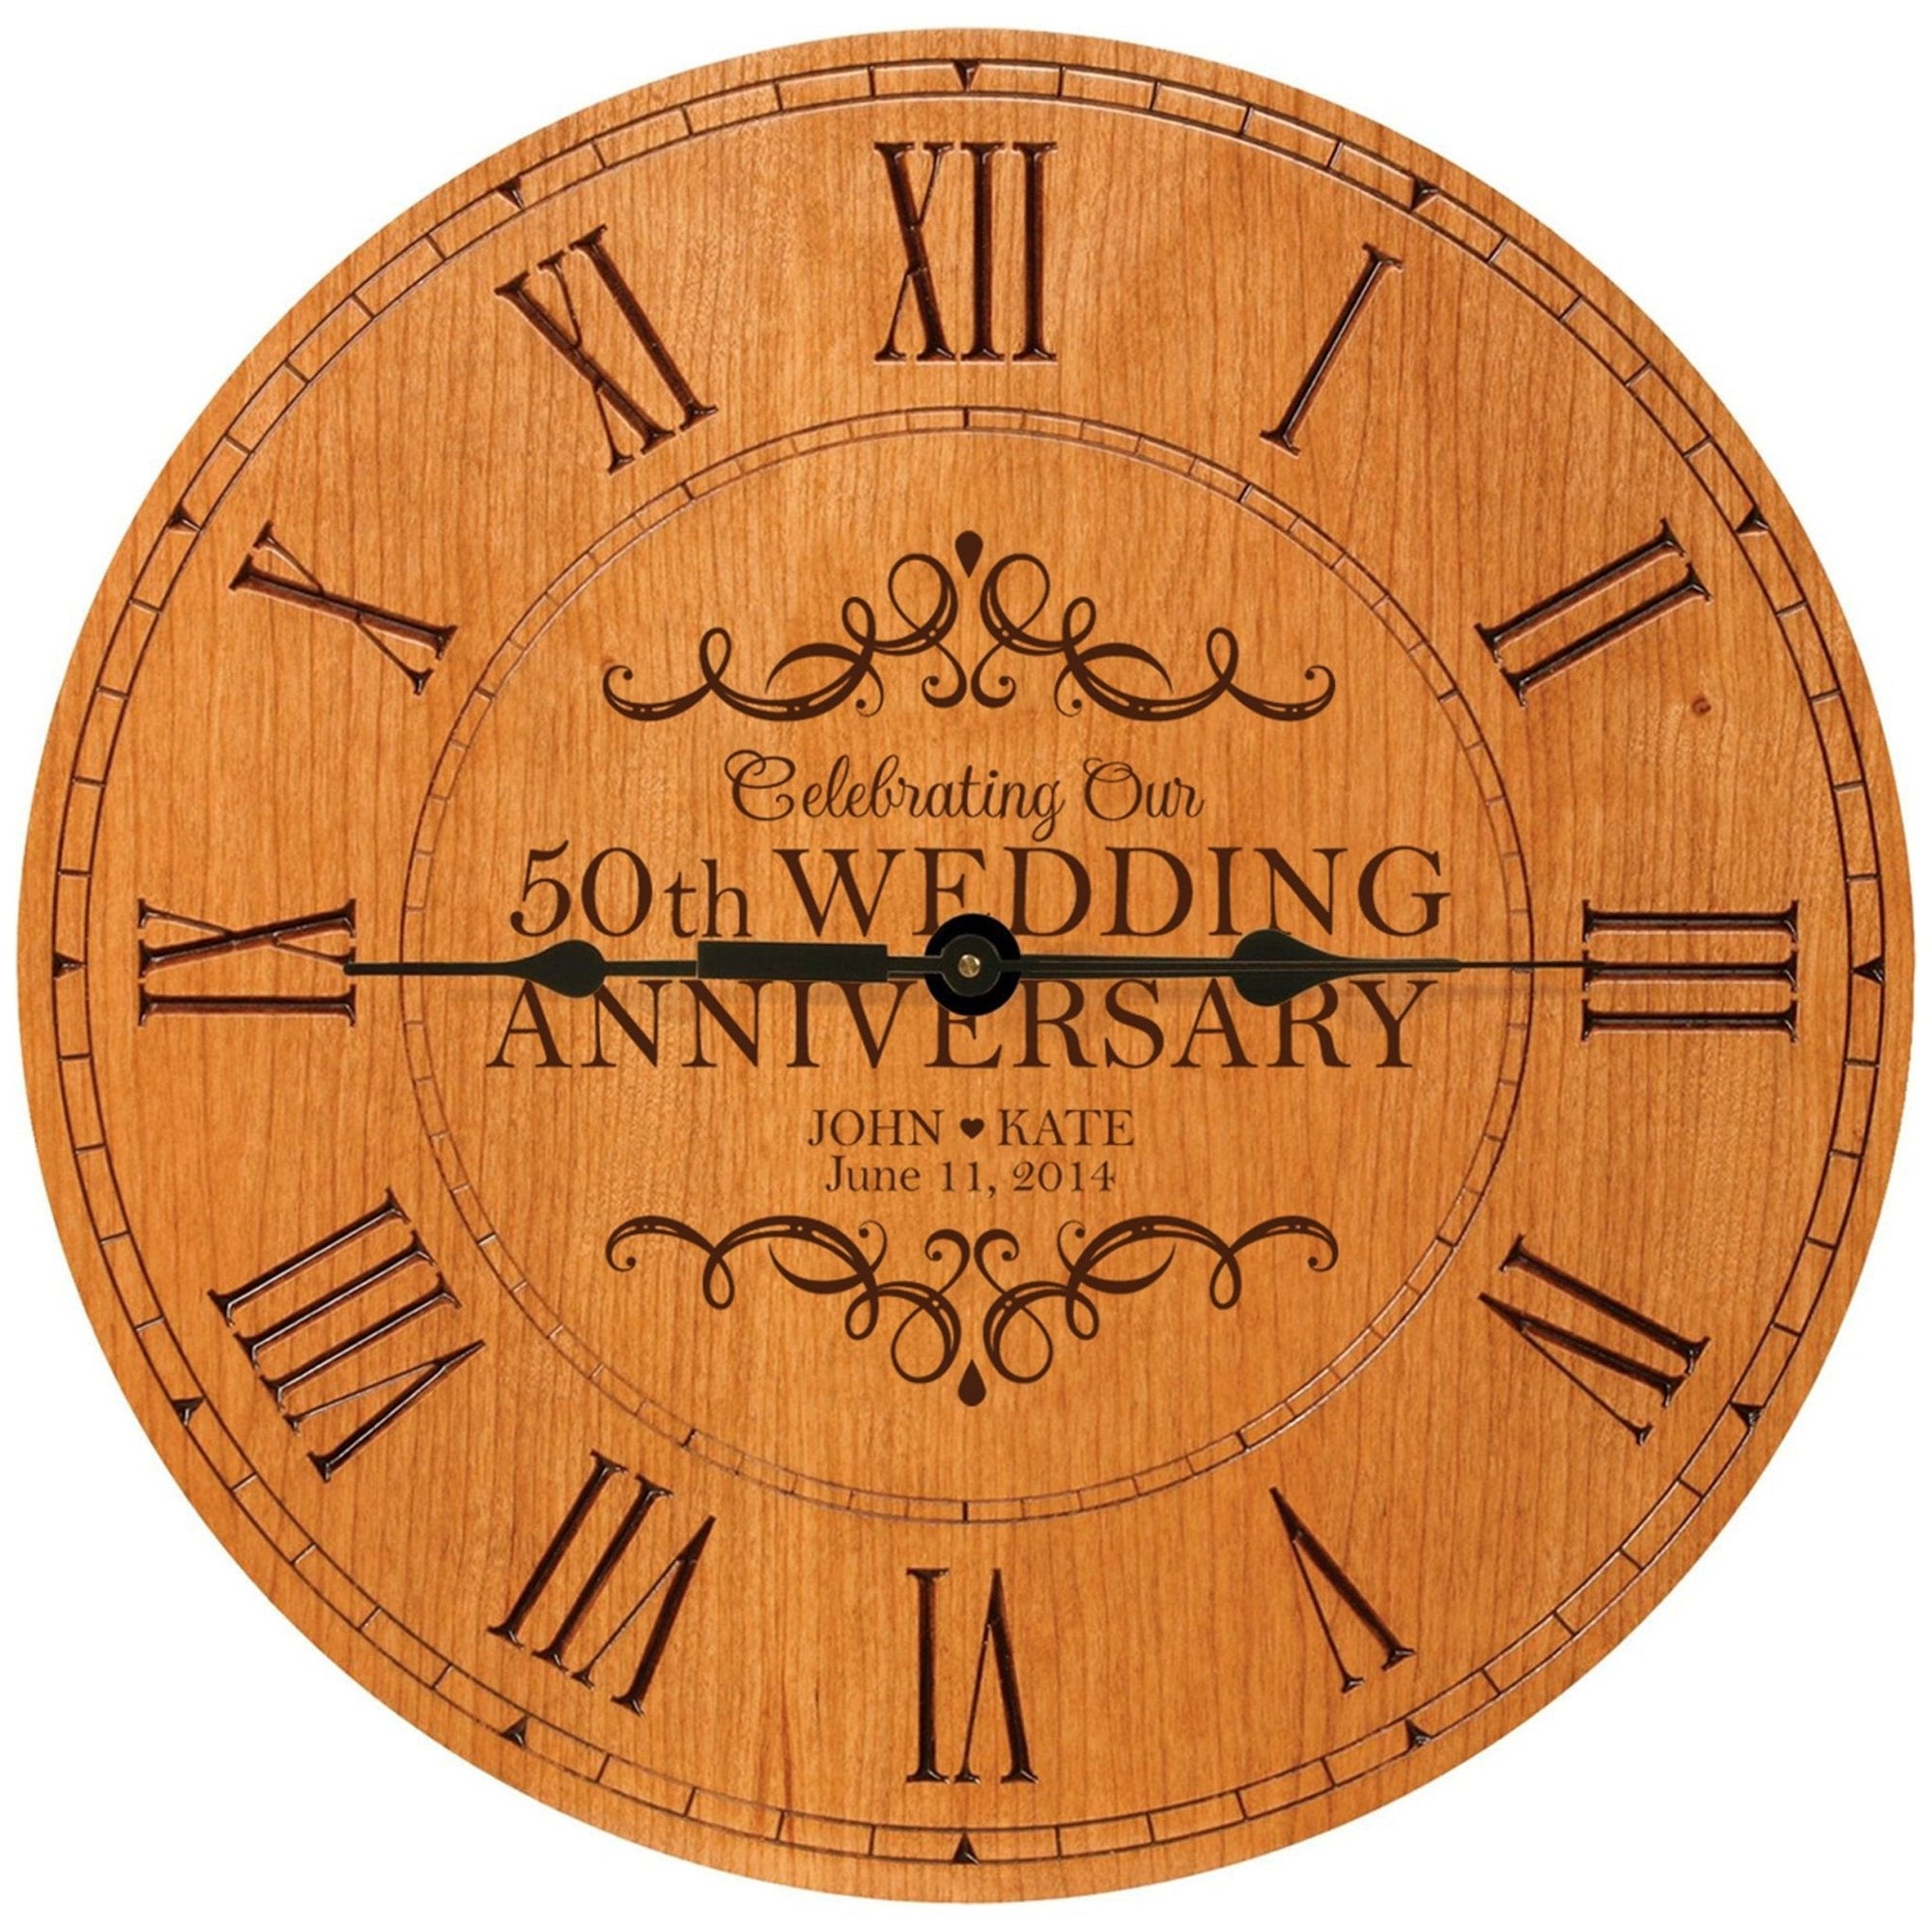 Personalized Engraved Wooden Wall Clock for 50th Wedding Anniversary Gift Ideas